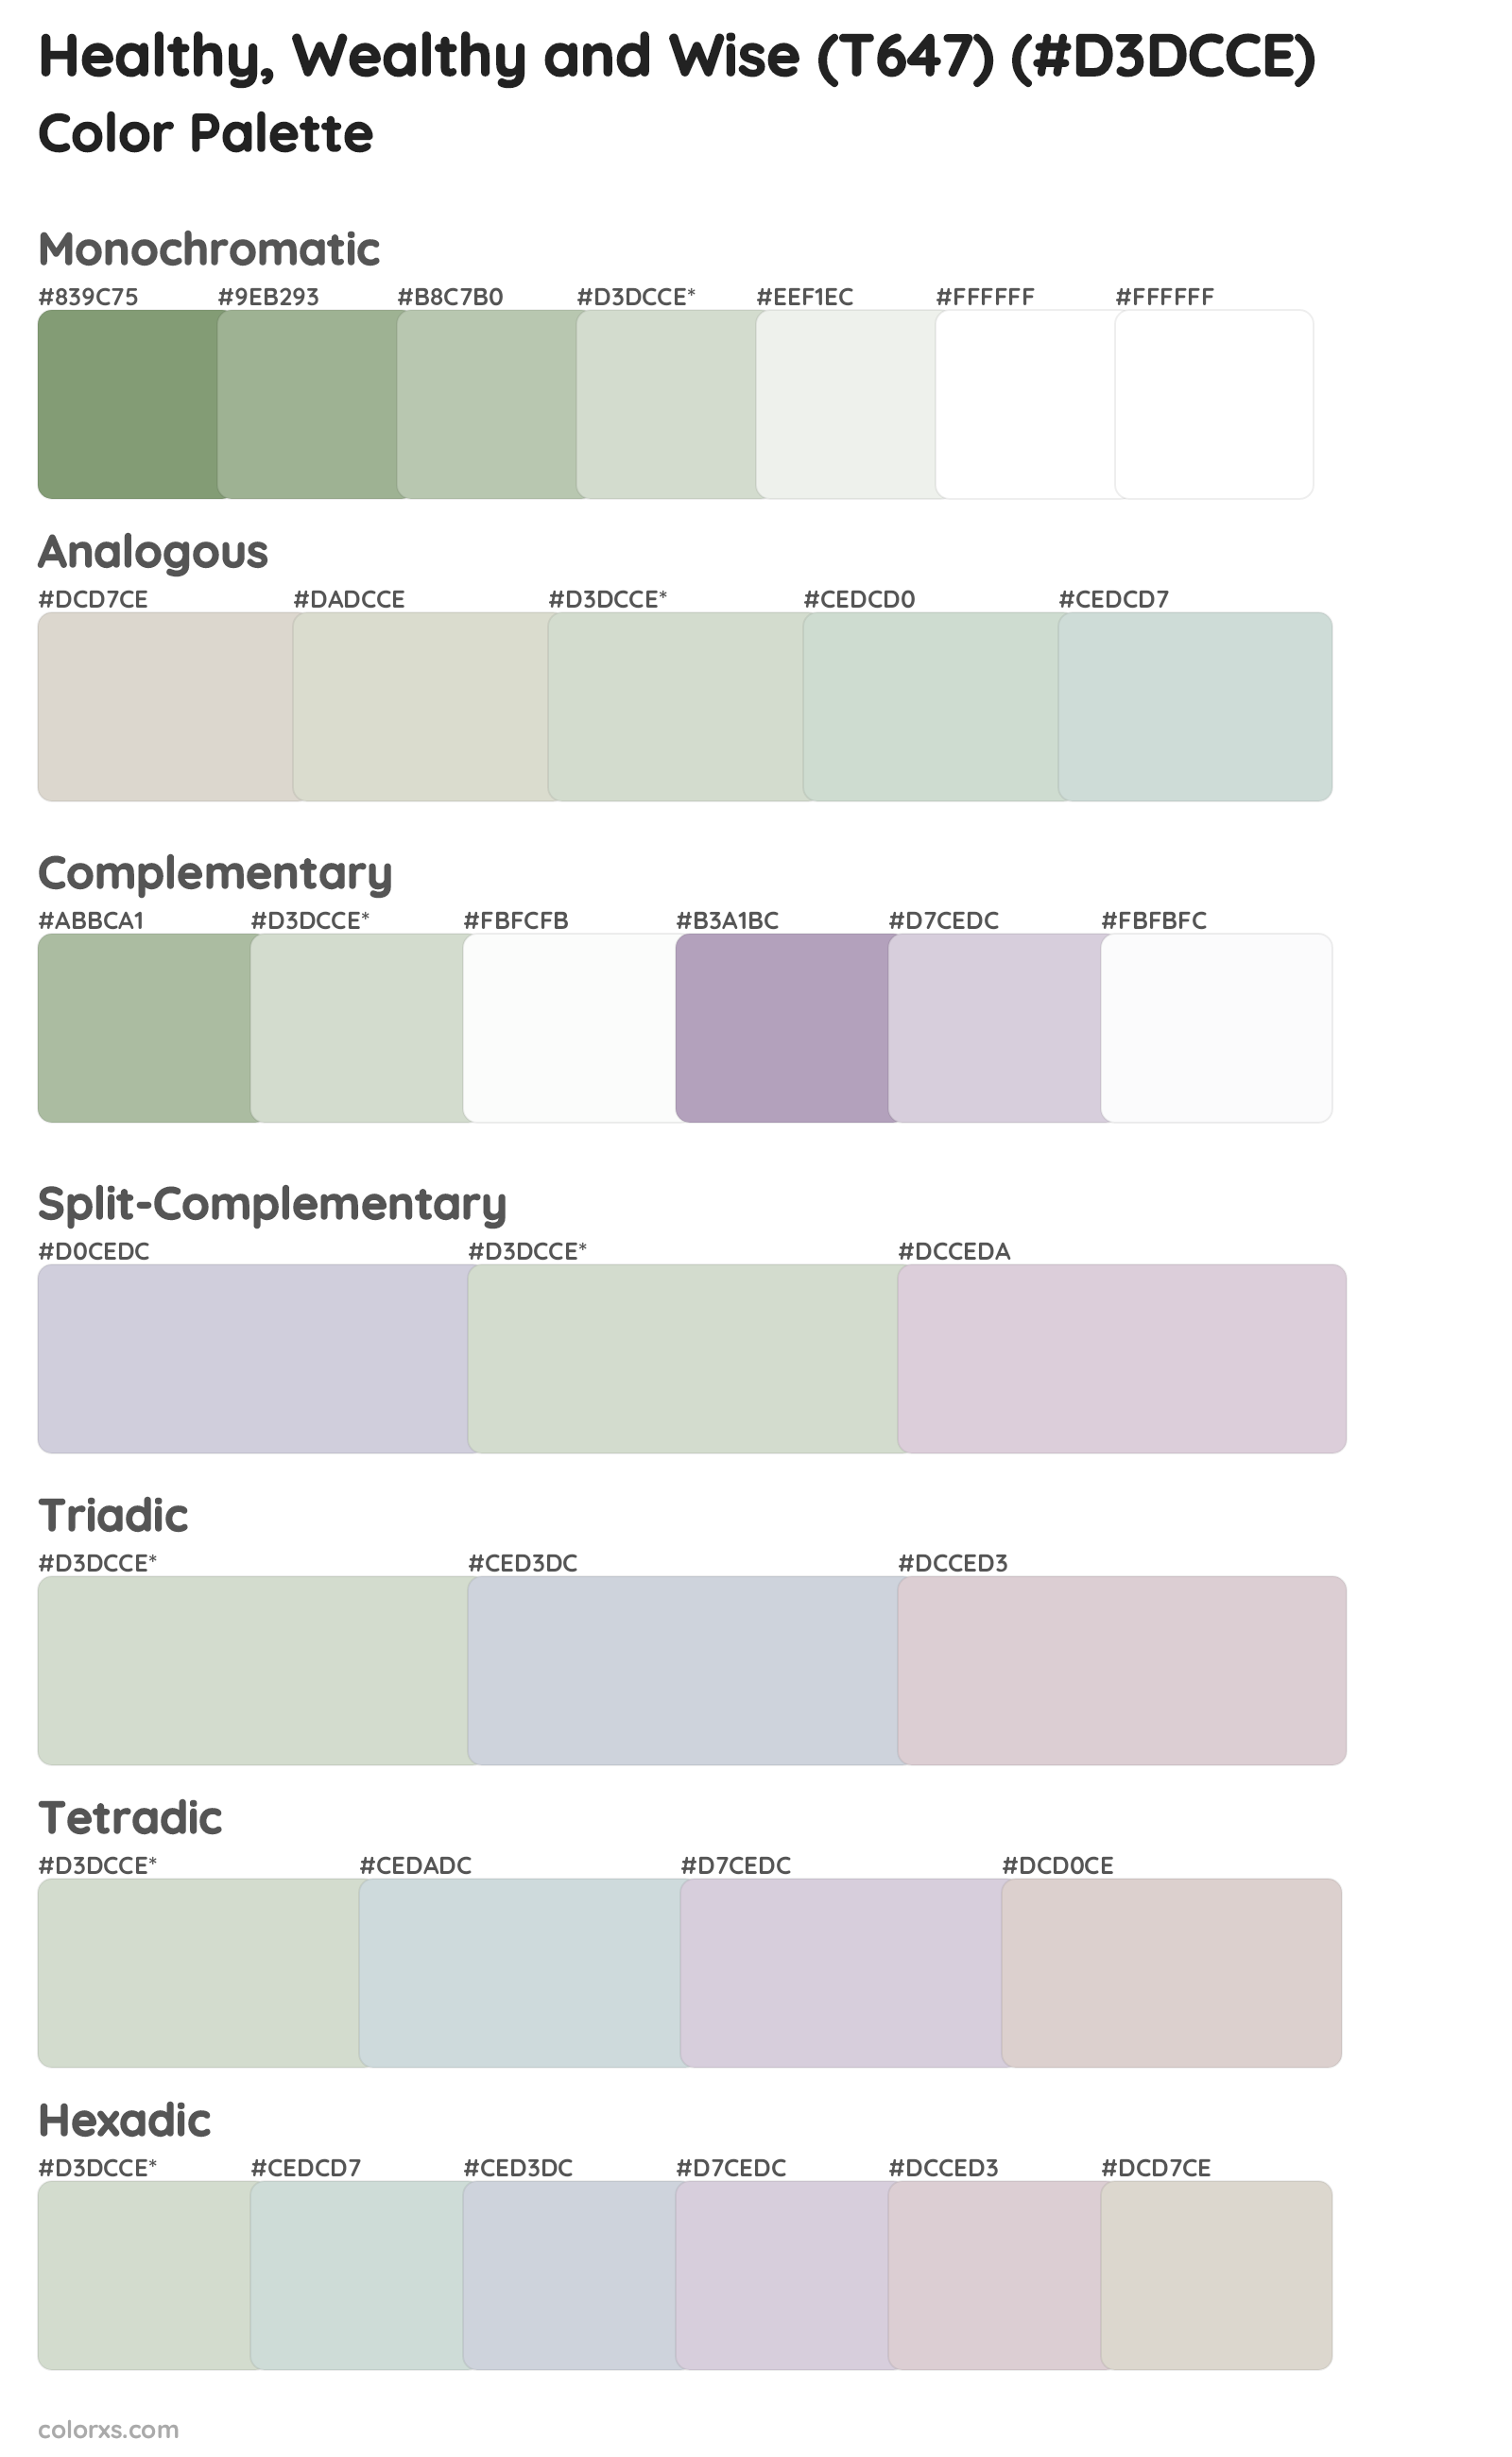 Healthy, Wealthy and Wise (T647) Color Scheme Palettes